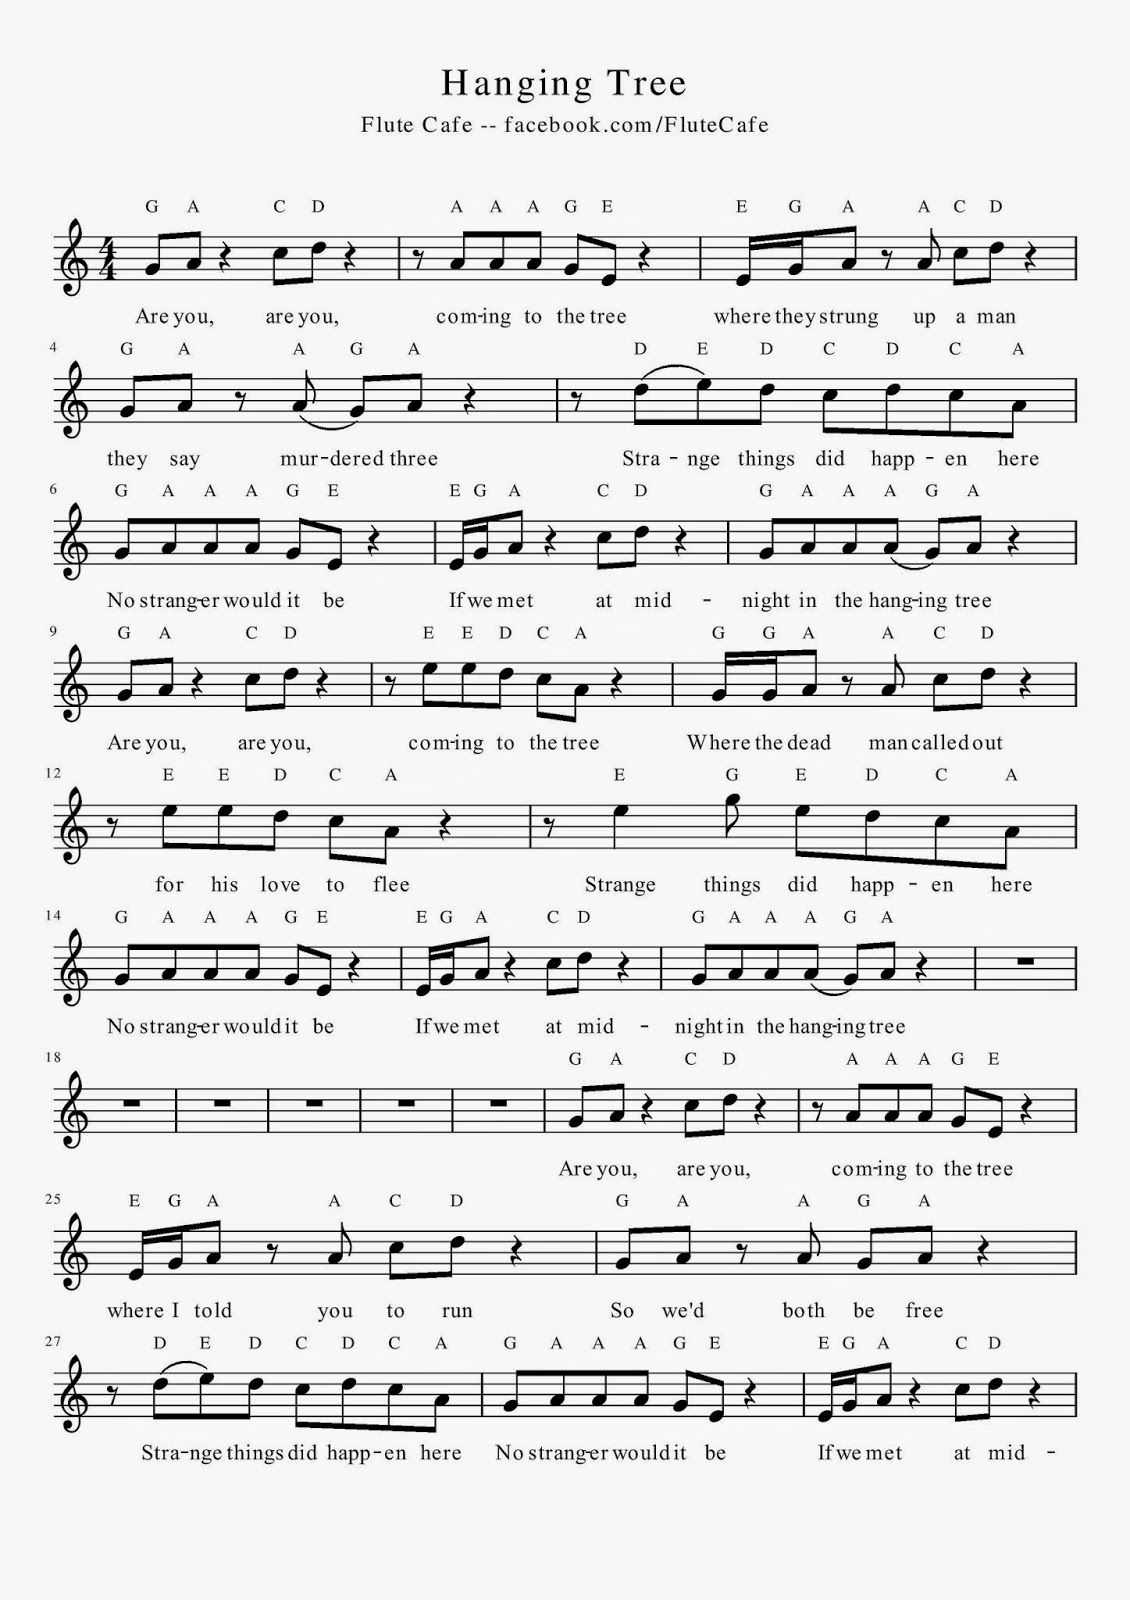 Flute Cafe: Hanging Tree (Flute Sheet Music) | Me In 2019 - Free Printable Flute Sheet Music